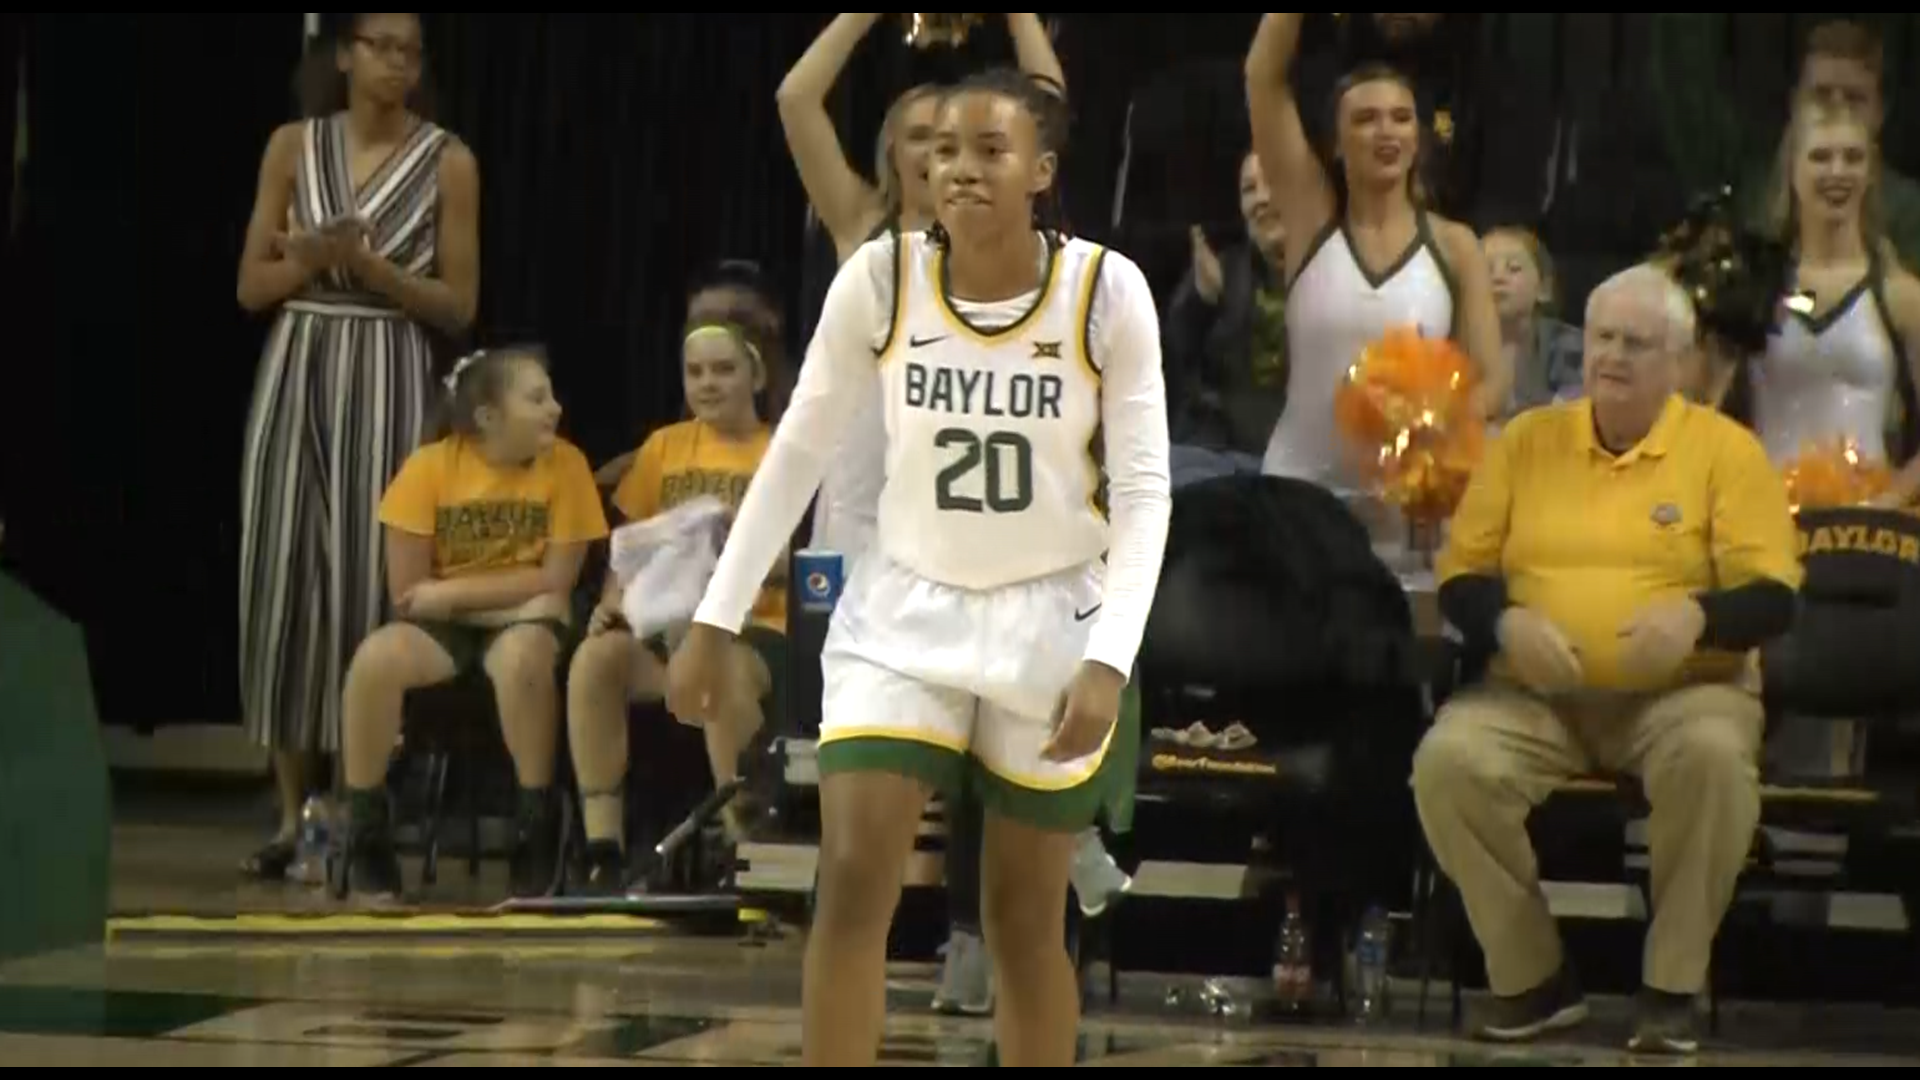 Calveion 'Juicy' Landrum talks about her experience playing on the team under Mulkey.